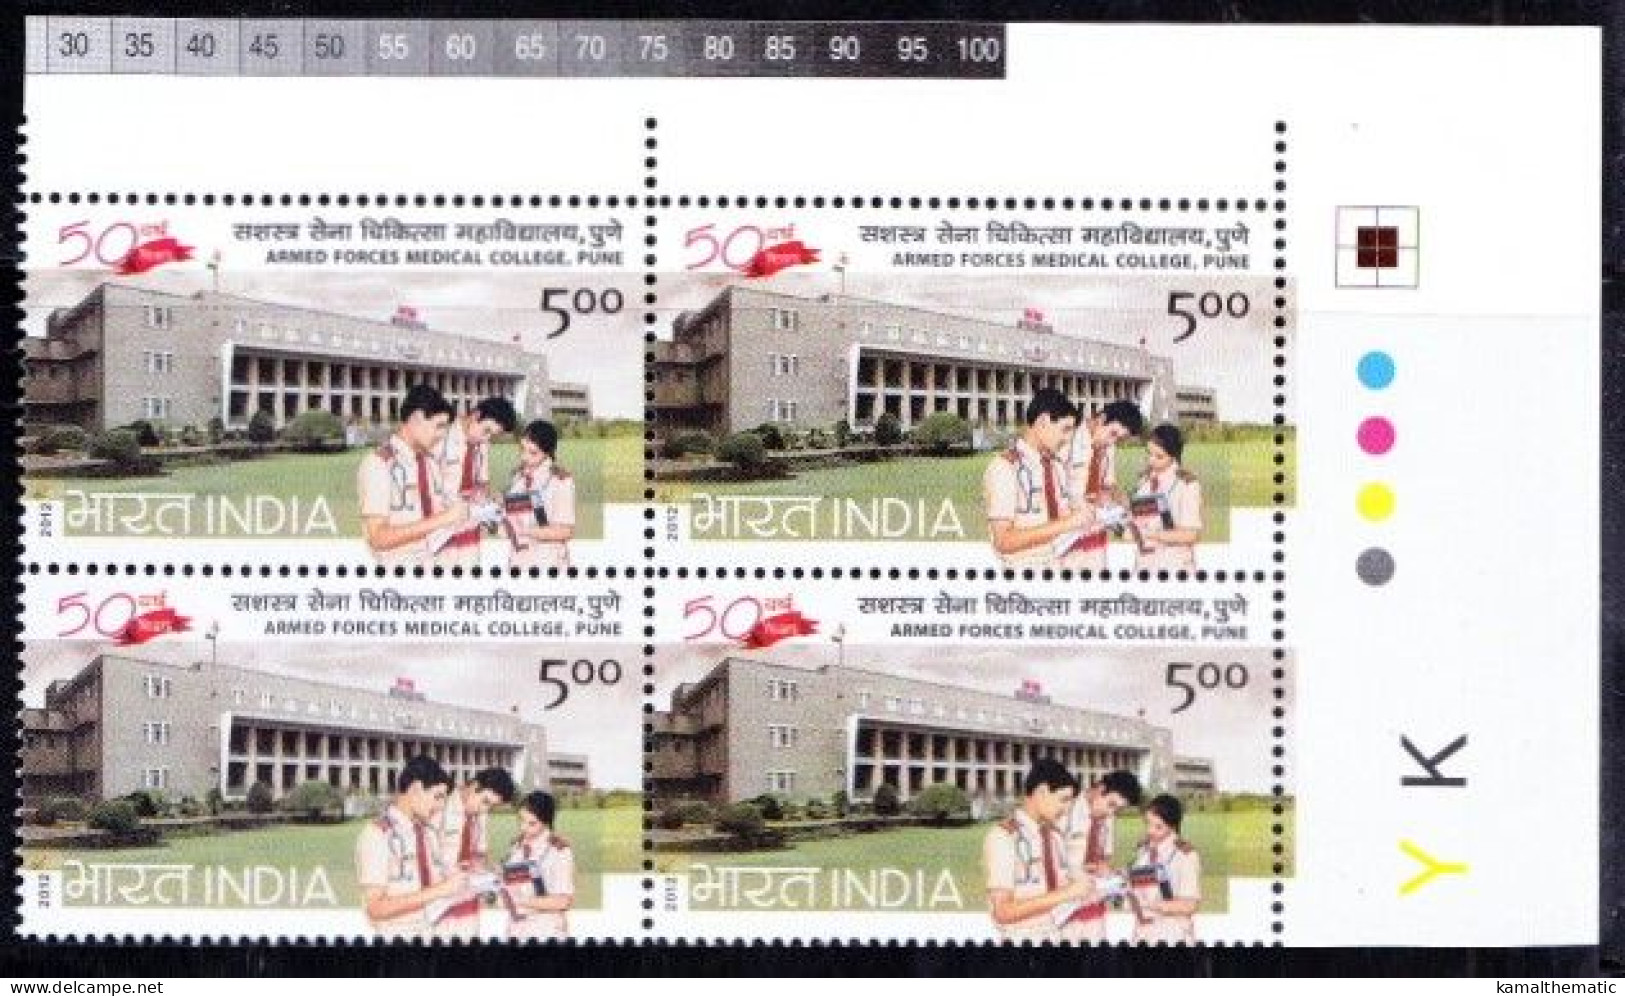 India 2012 MNH Blk 4, Up. Rt, Colour Guide, Armed Forces, Medical College, Stethoscope, - Medicina